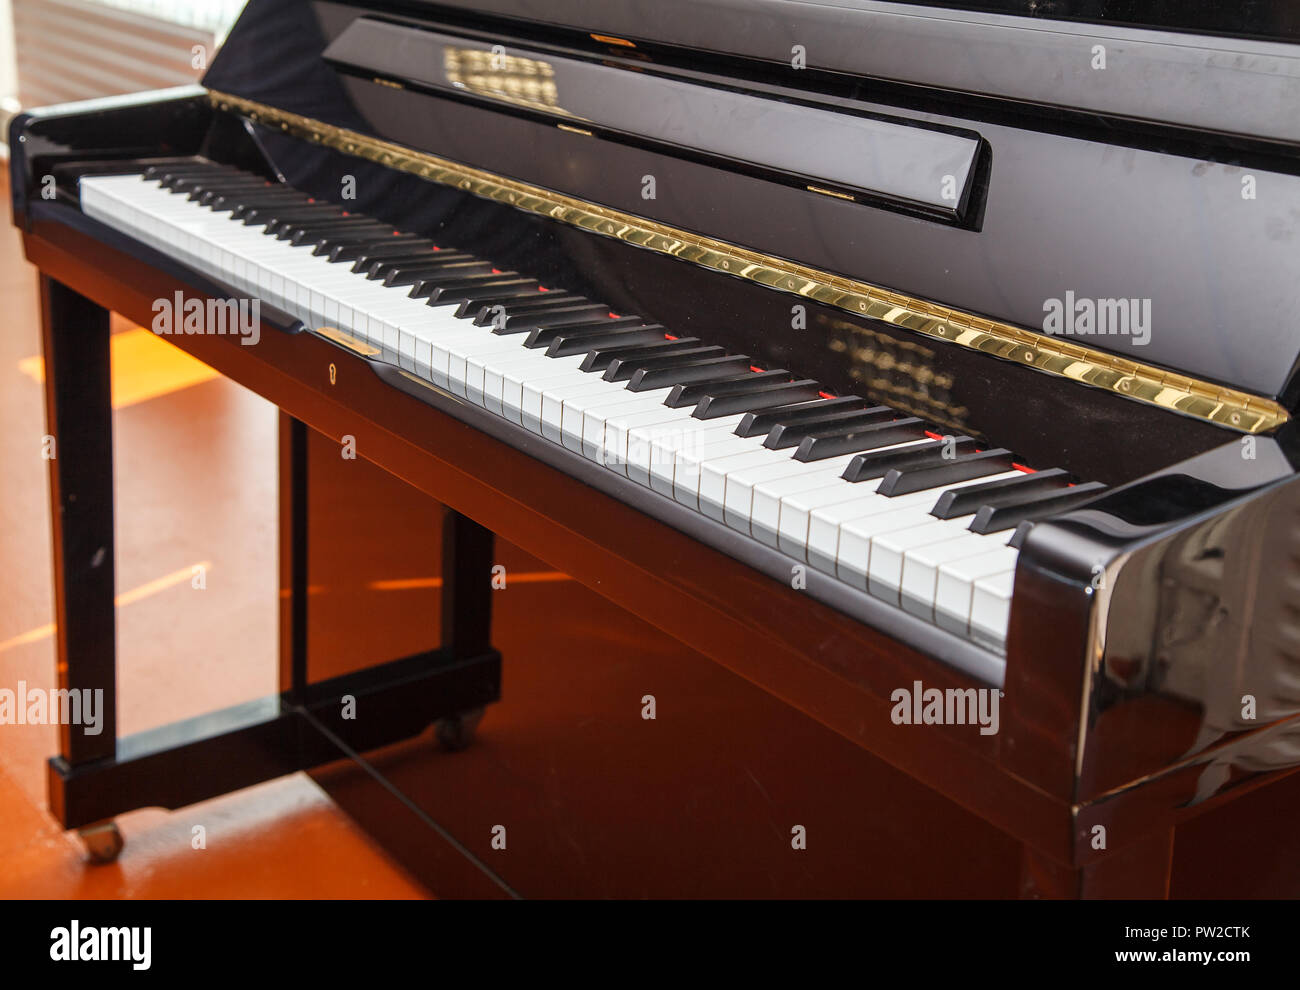 new modern piano keyboard indoor with bright daylight Stock Photo - Alamy